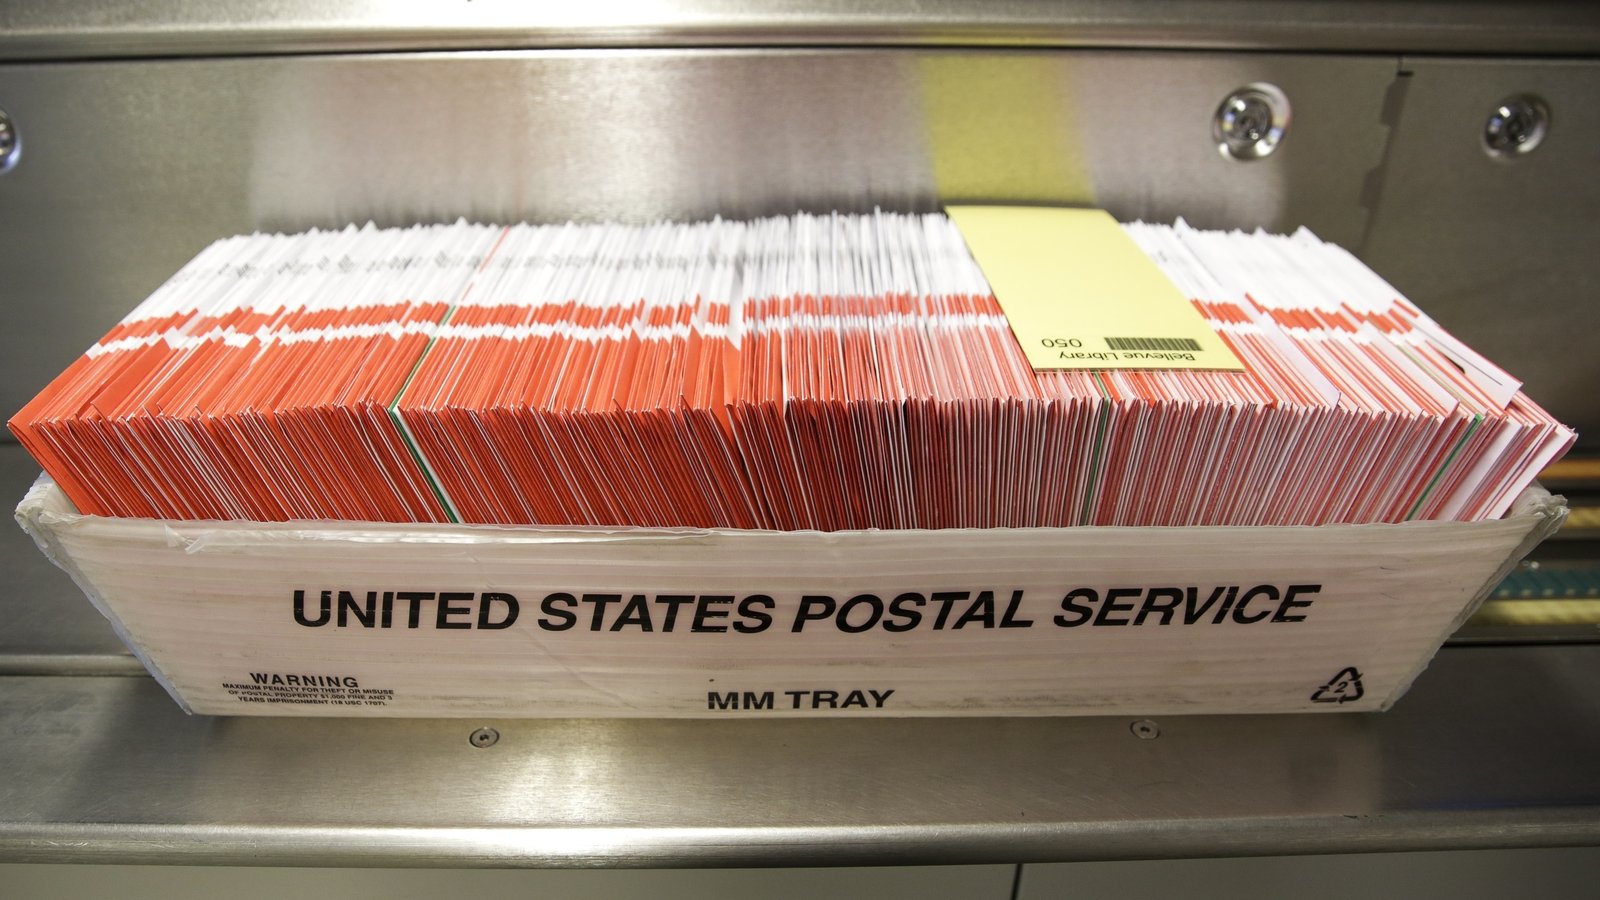 Trump appealed the ruling on electoral postal services

